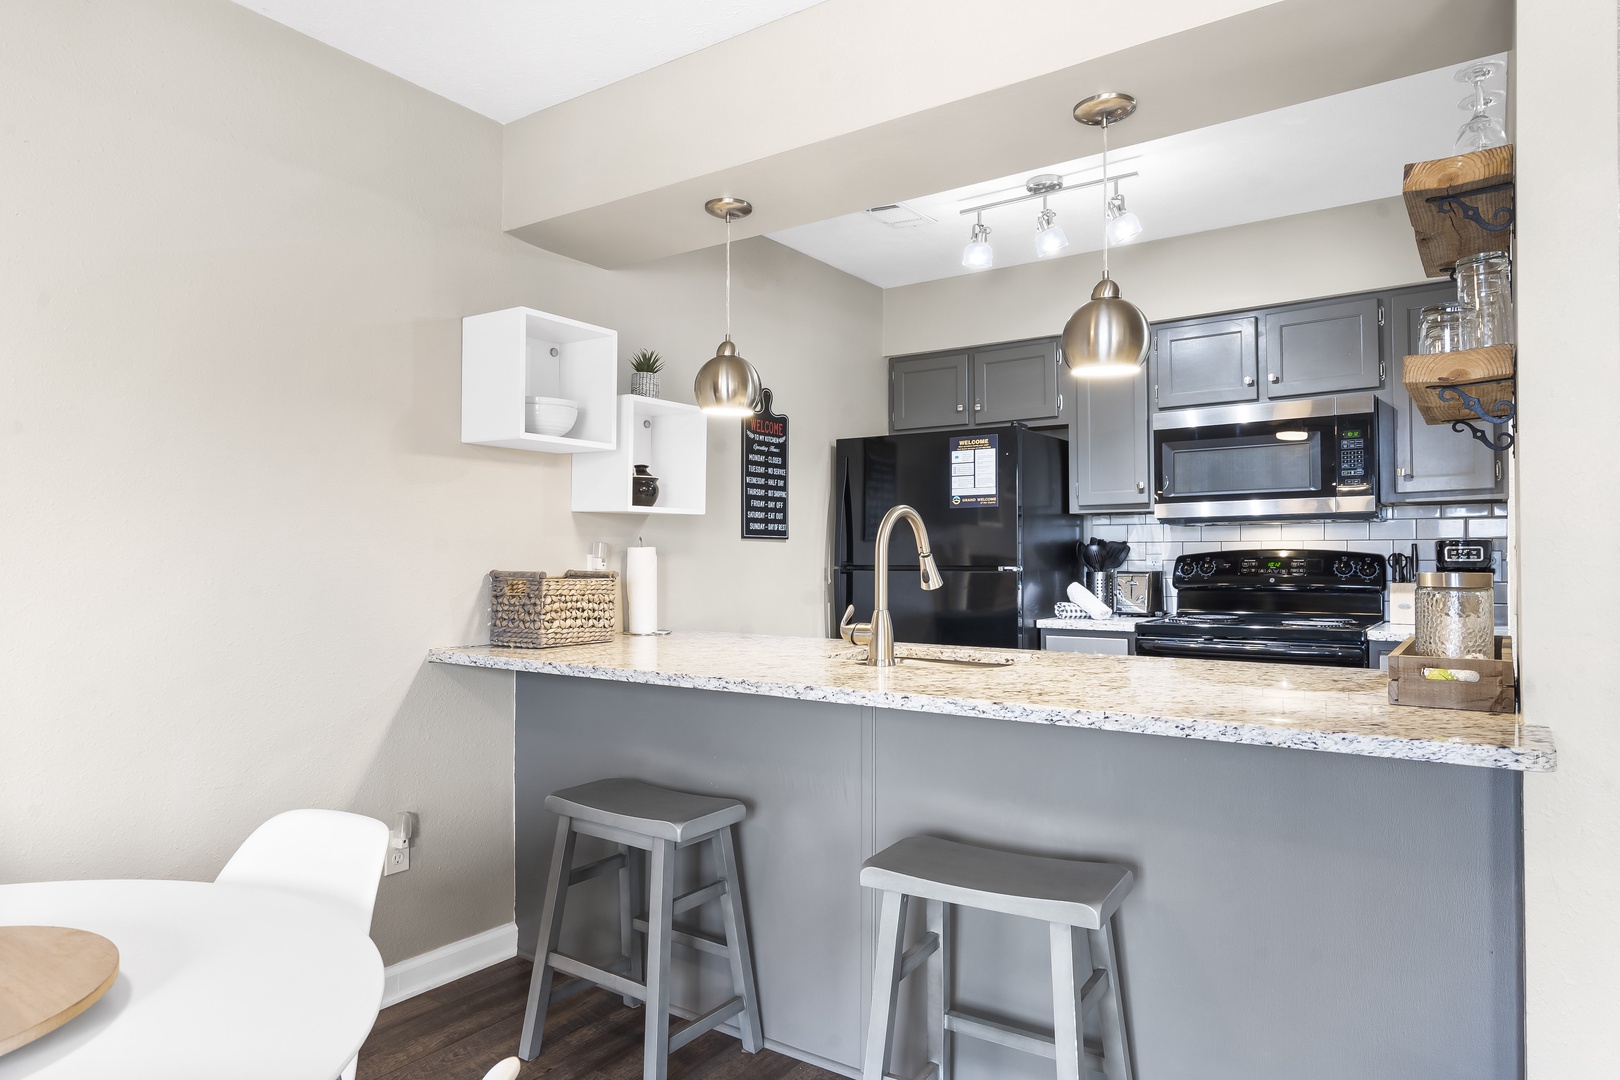 Sip morning coffee or grab a bite at the kitchen counter, with seating for 2